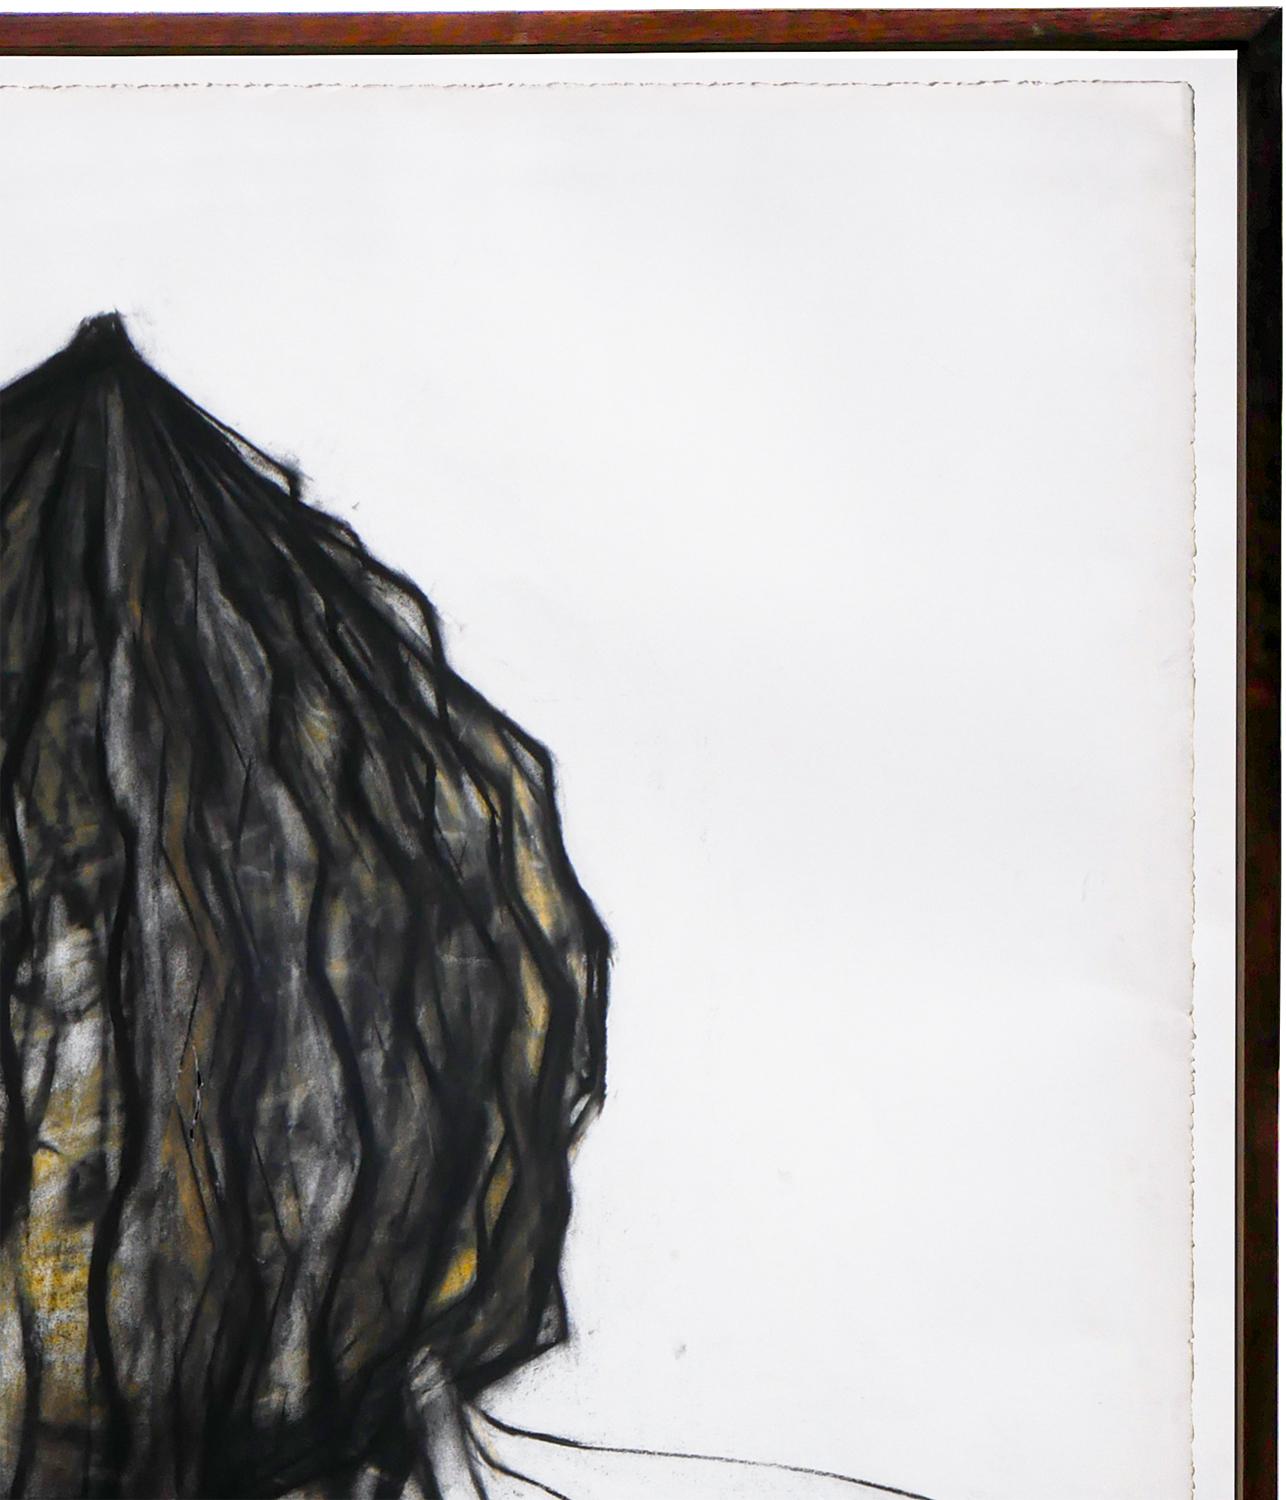 Black and yellow abstract charcoal drawing by Houston artist Paul Forsythe. The piece features an abstract, organic shape floating against a white background. Currently hung in a light wood floating frame. 

Dimensions With Frame: H 49.63 in. x W